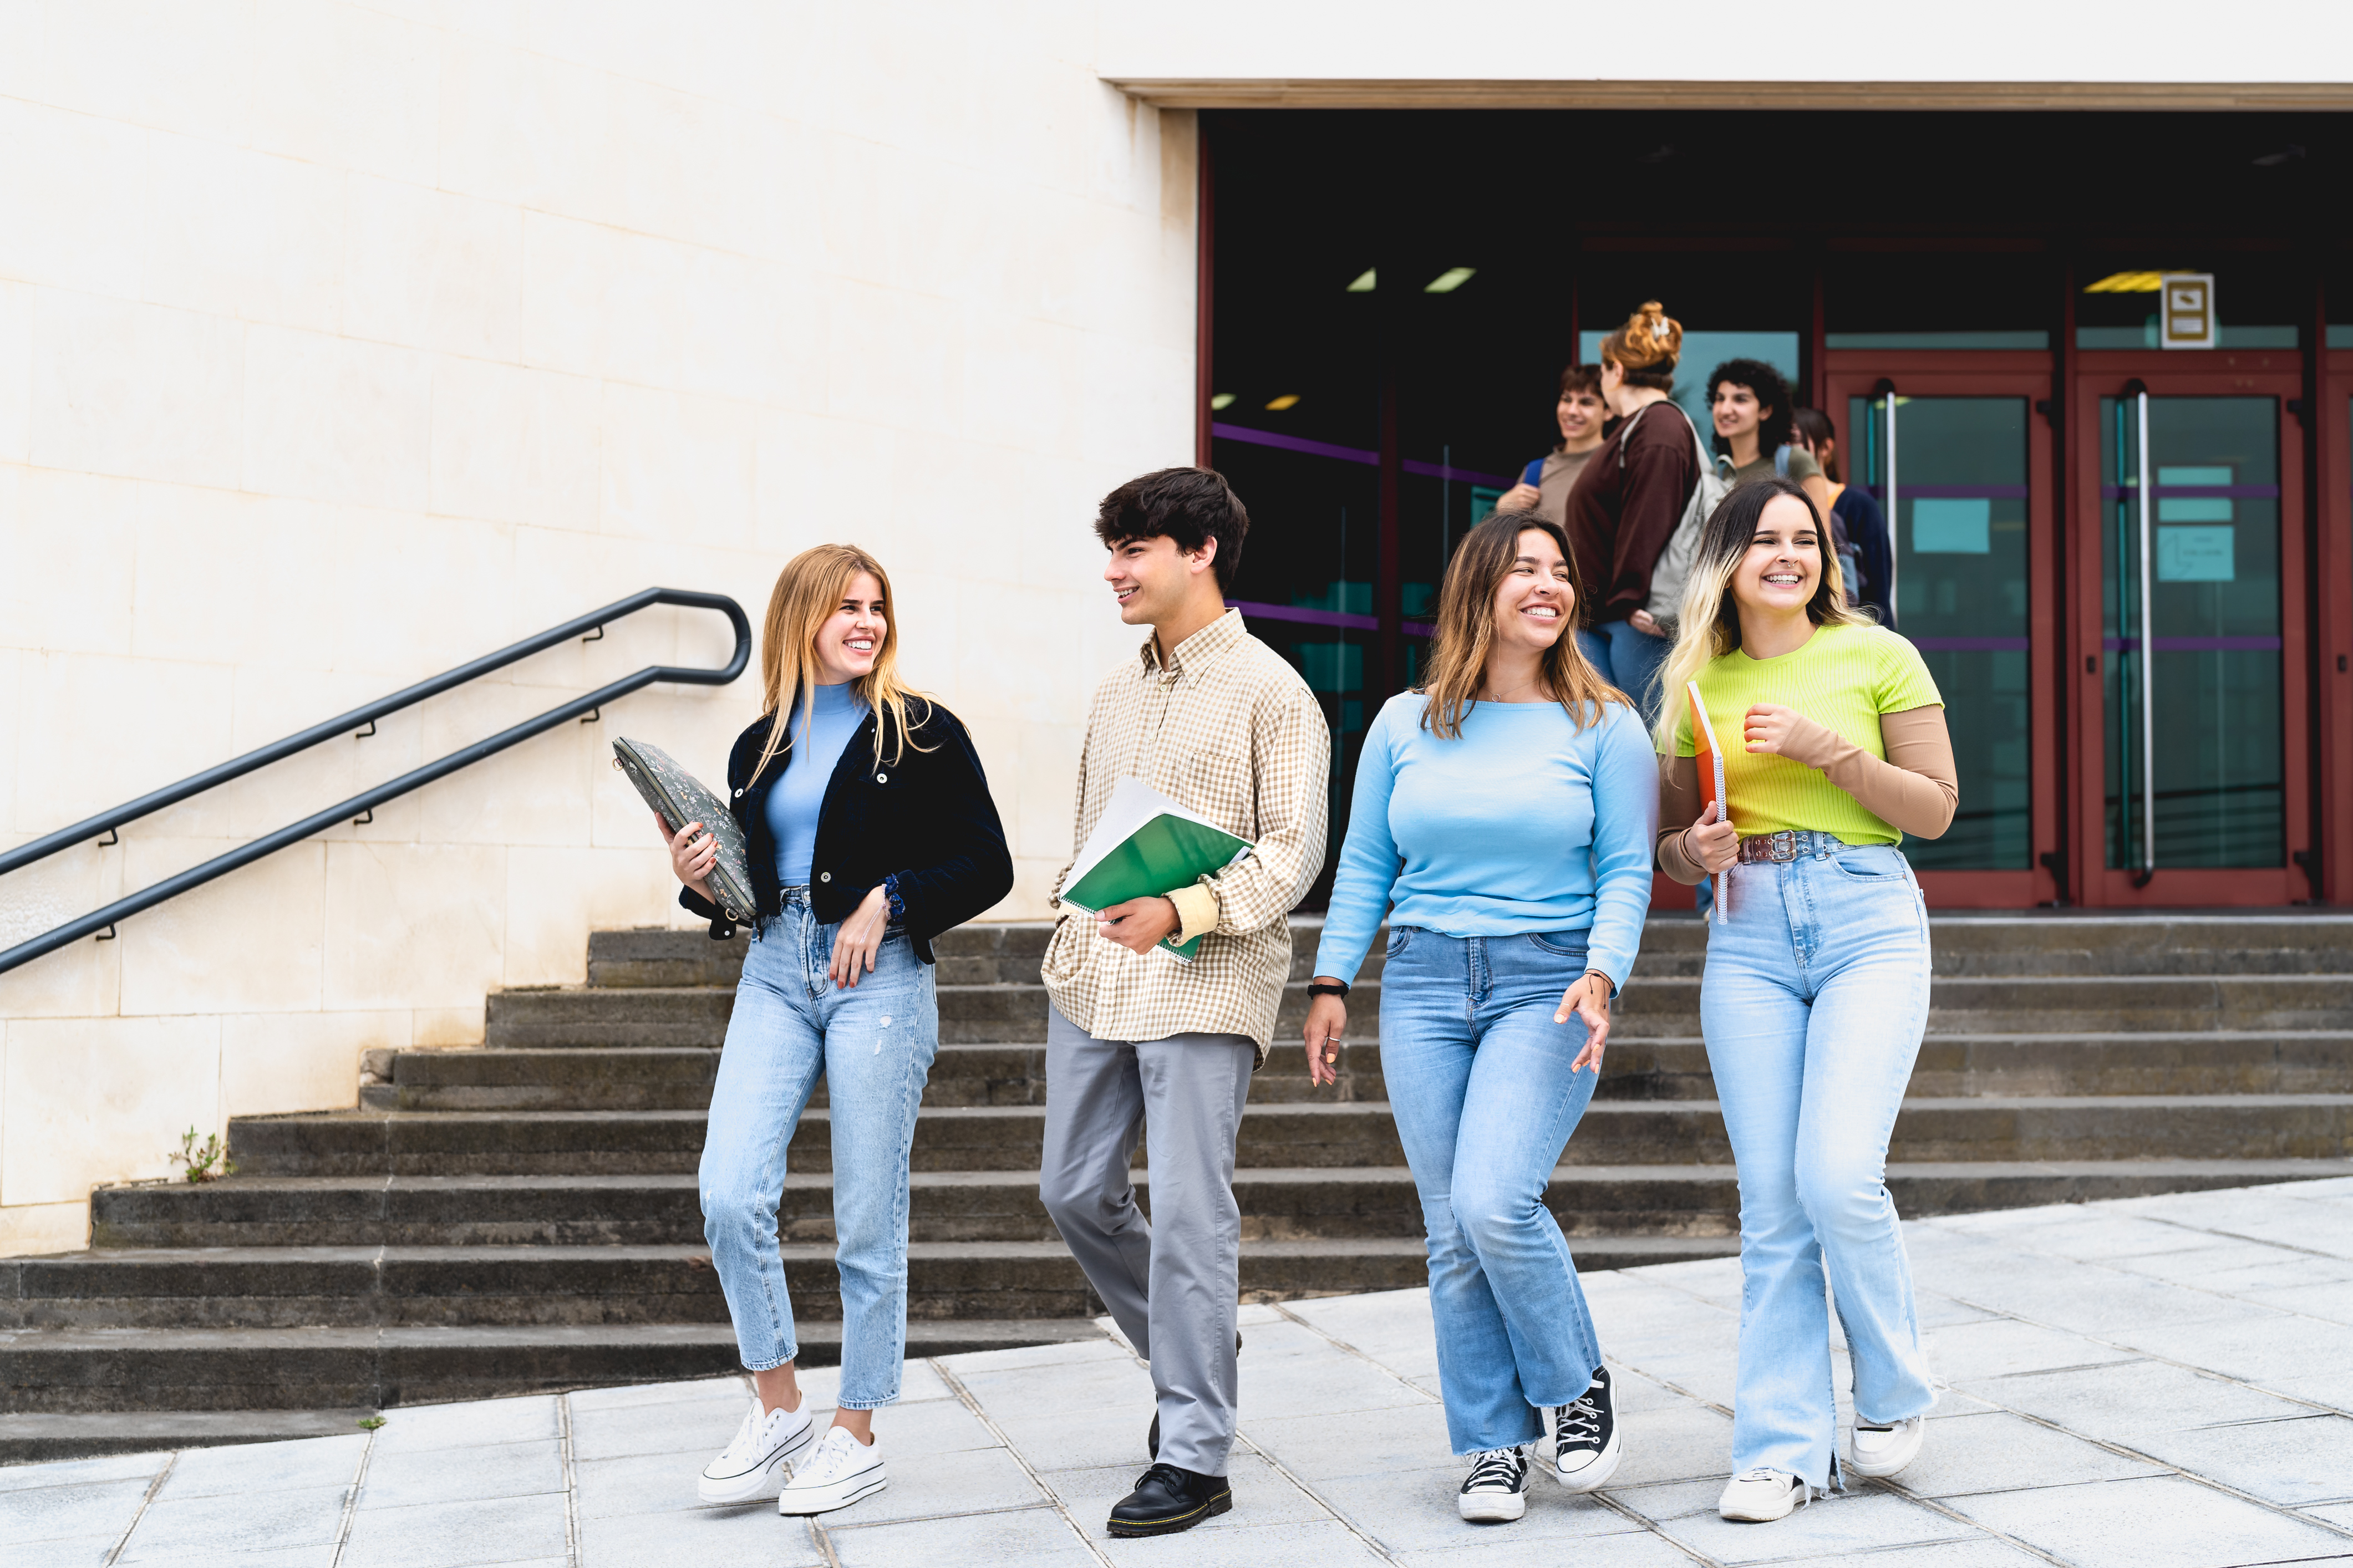 Young diverse students leaving university after lesson - Youth and education concept